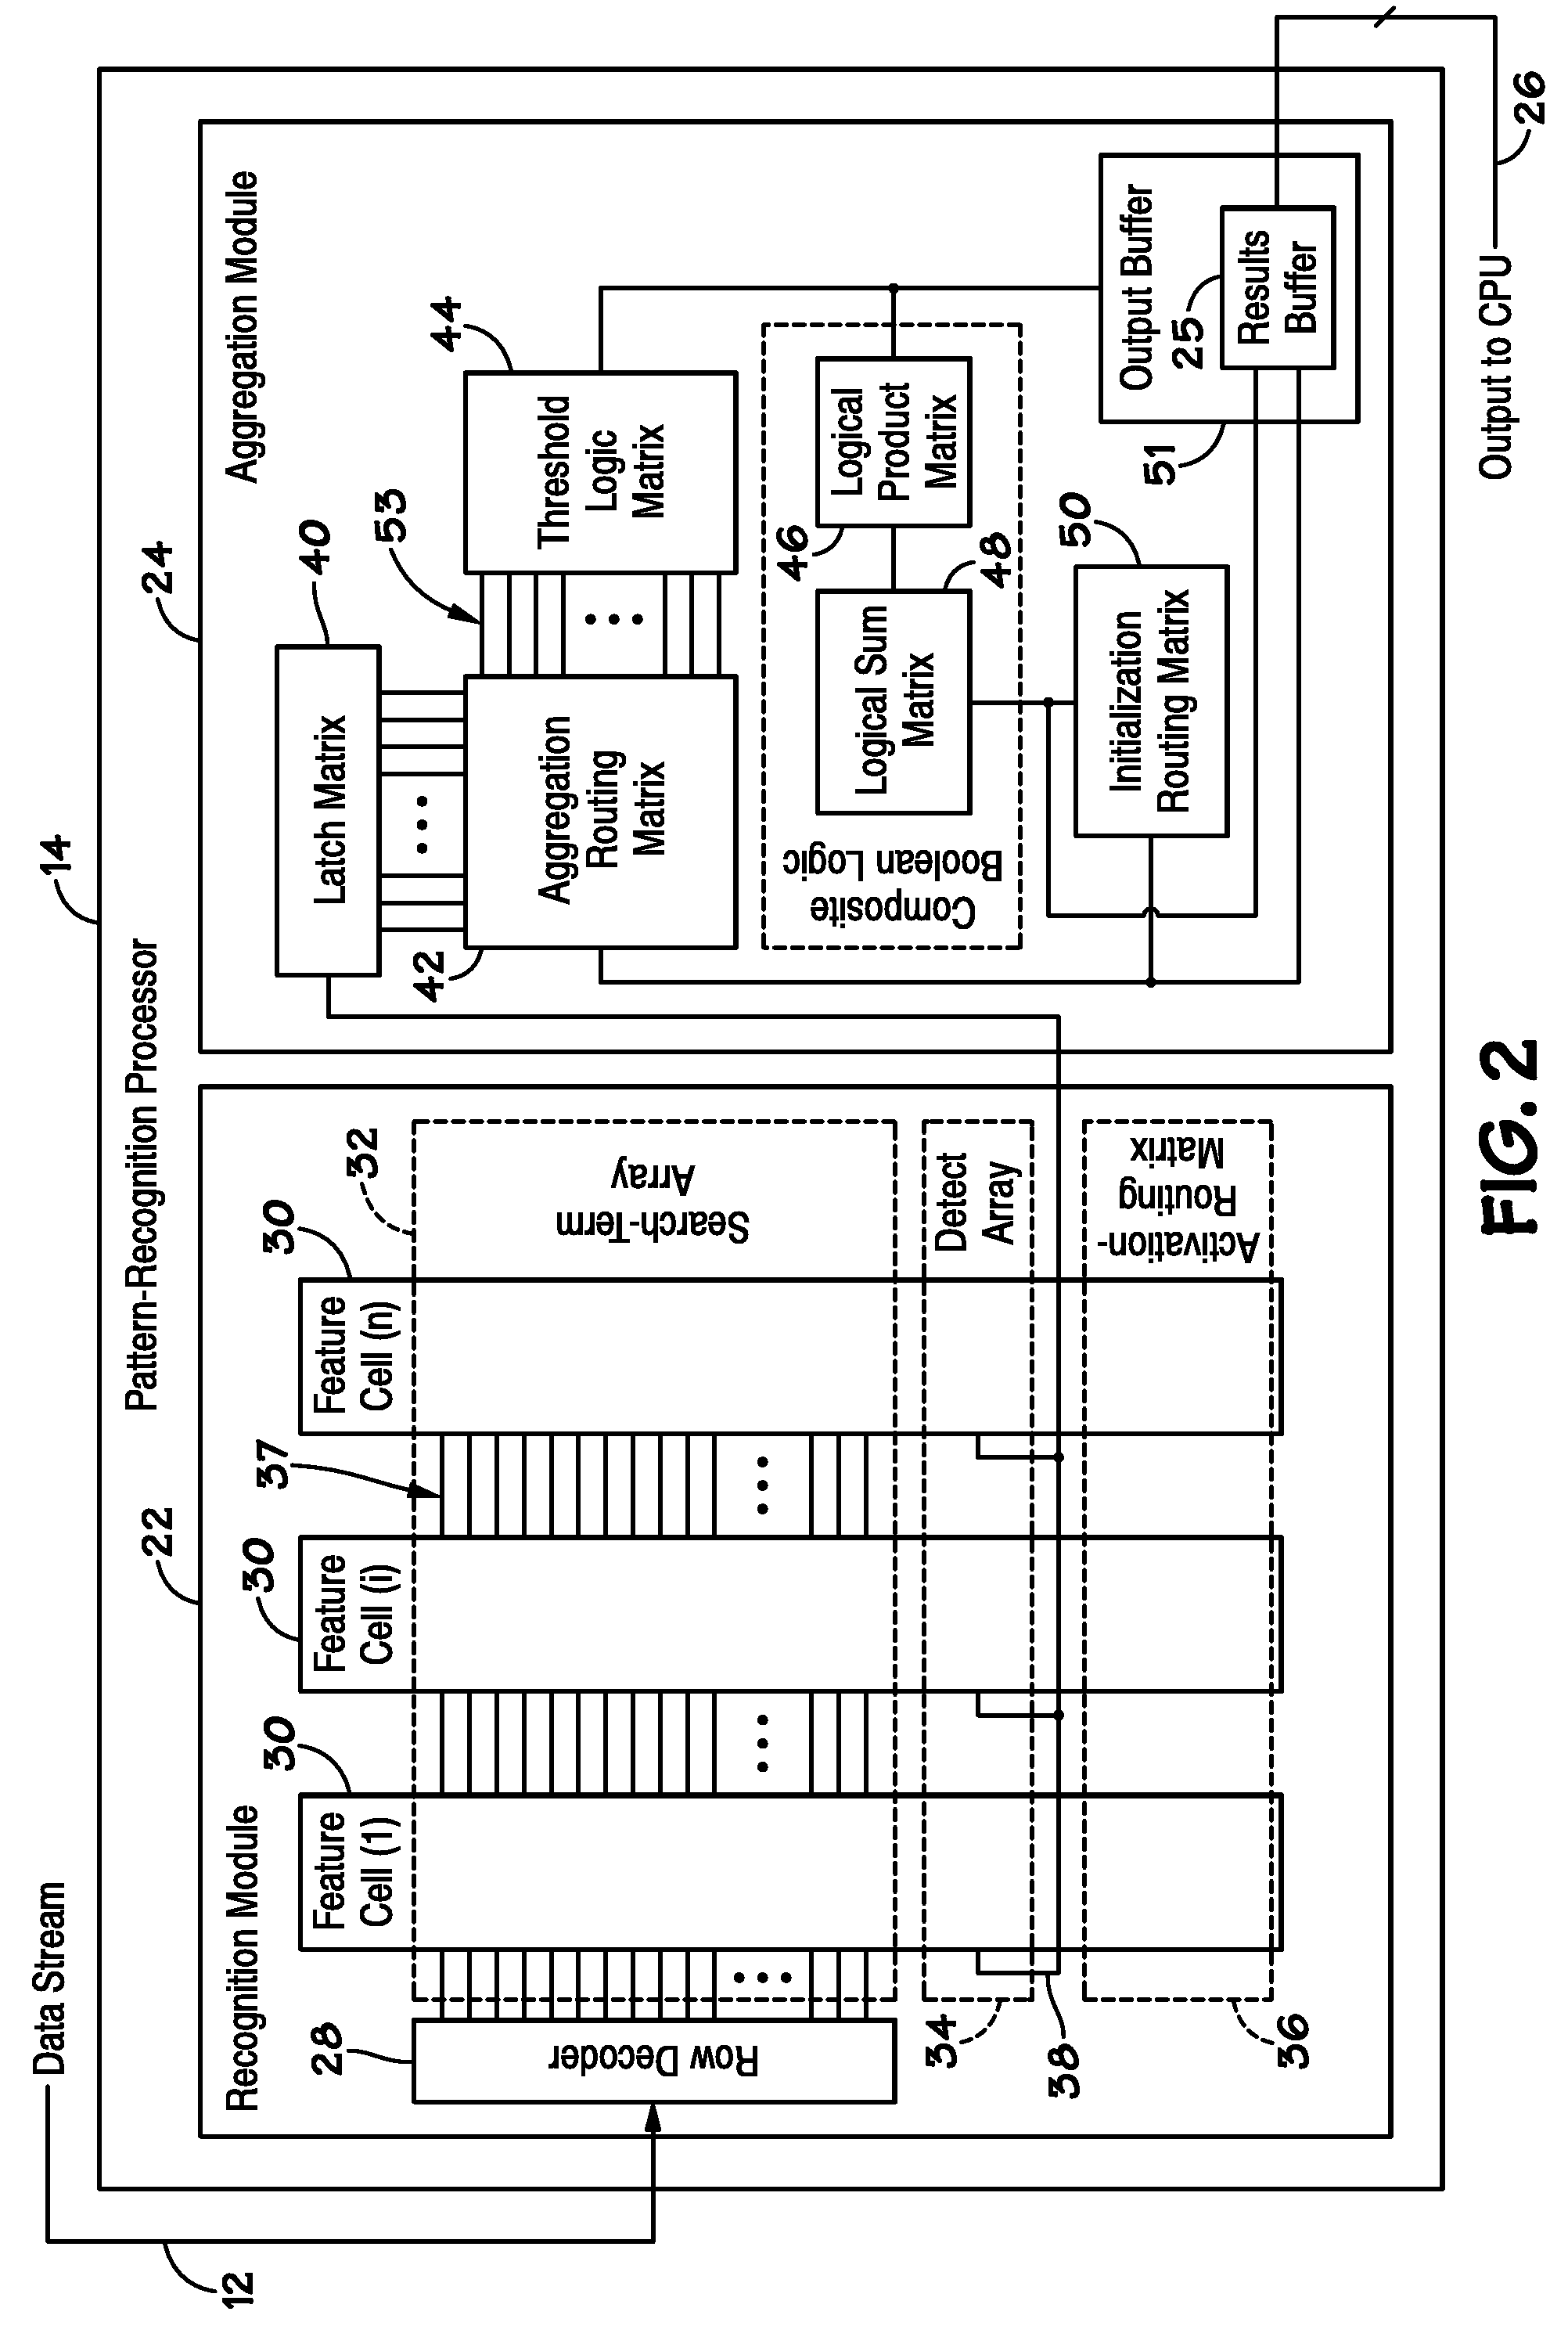 Devices, systems, and methods for communicating pattern matching results of a parallel pattern search engine